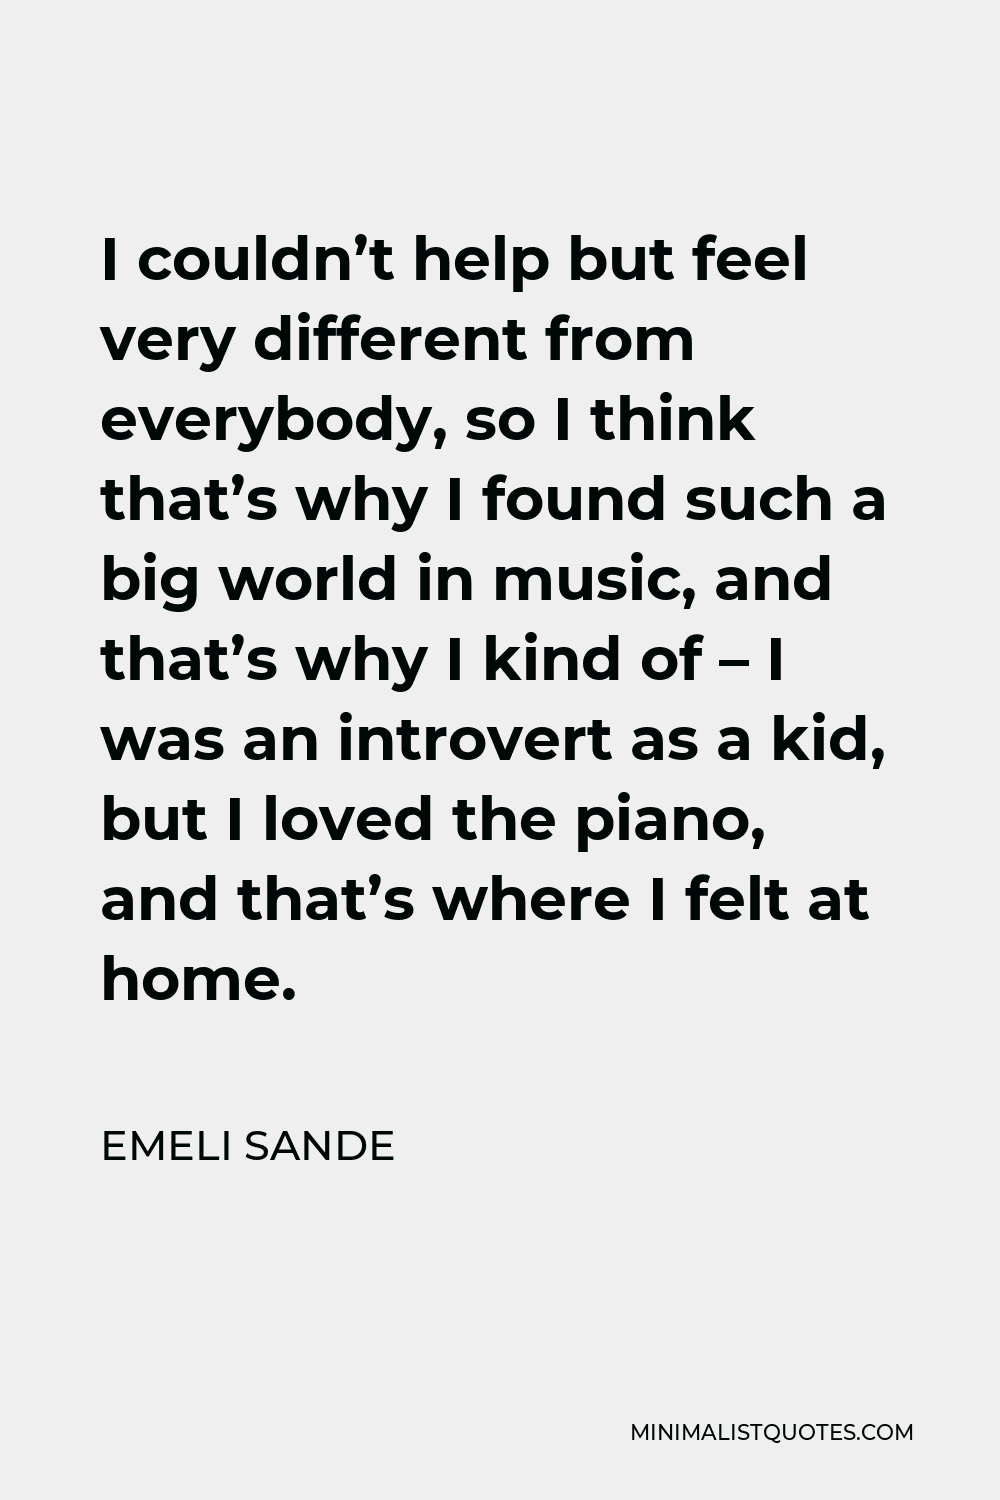 Emeli Sande Quote - I couldn’t help but feel very different from everybody, so I think that’s why I found such a big world in music, and that’s why I kind of – I was an introvert as a kid, but I loved the piano, and that’s where I felt at home.